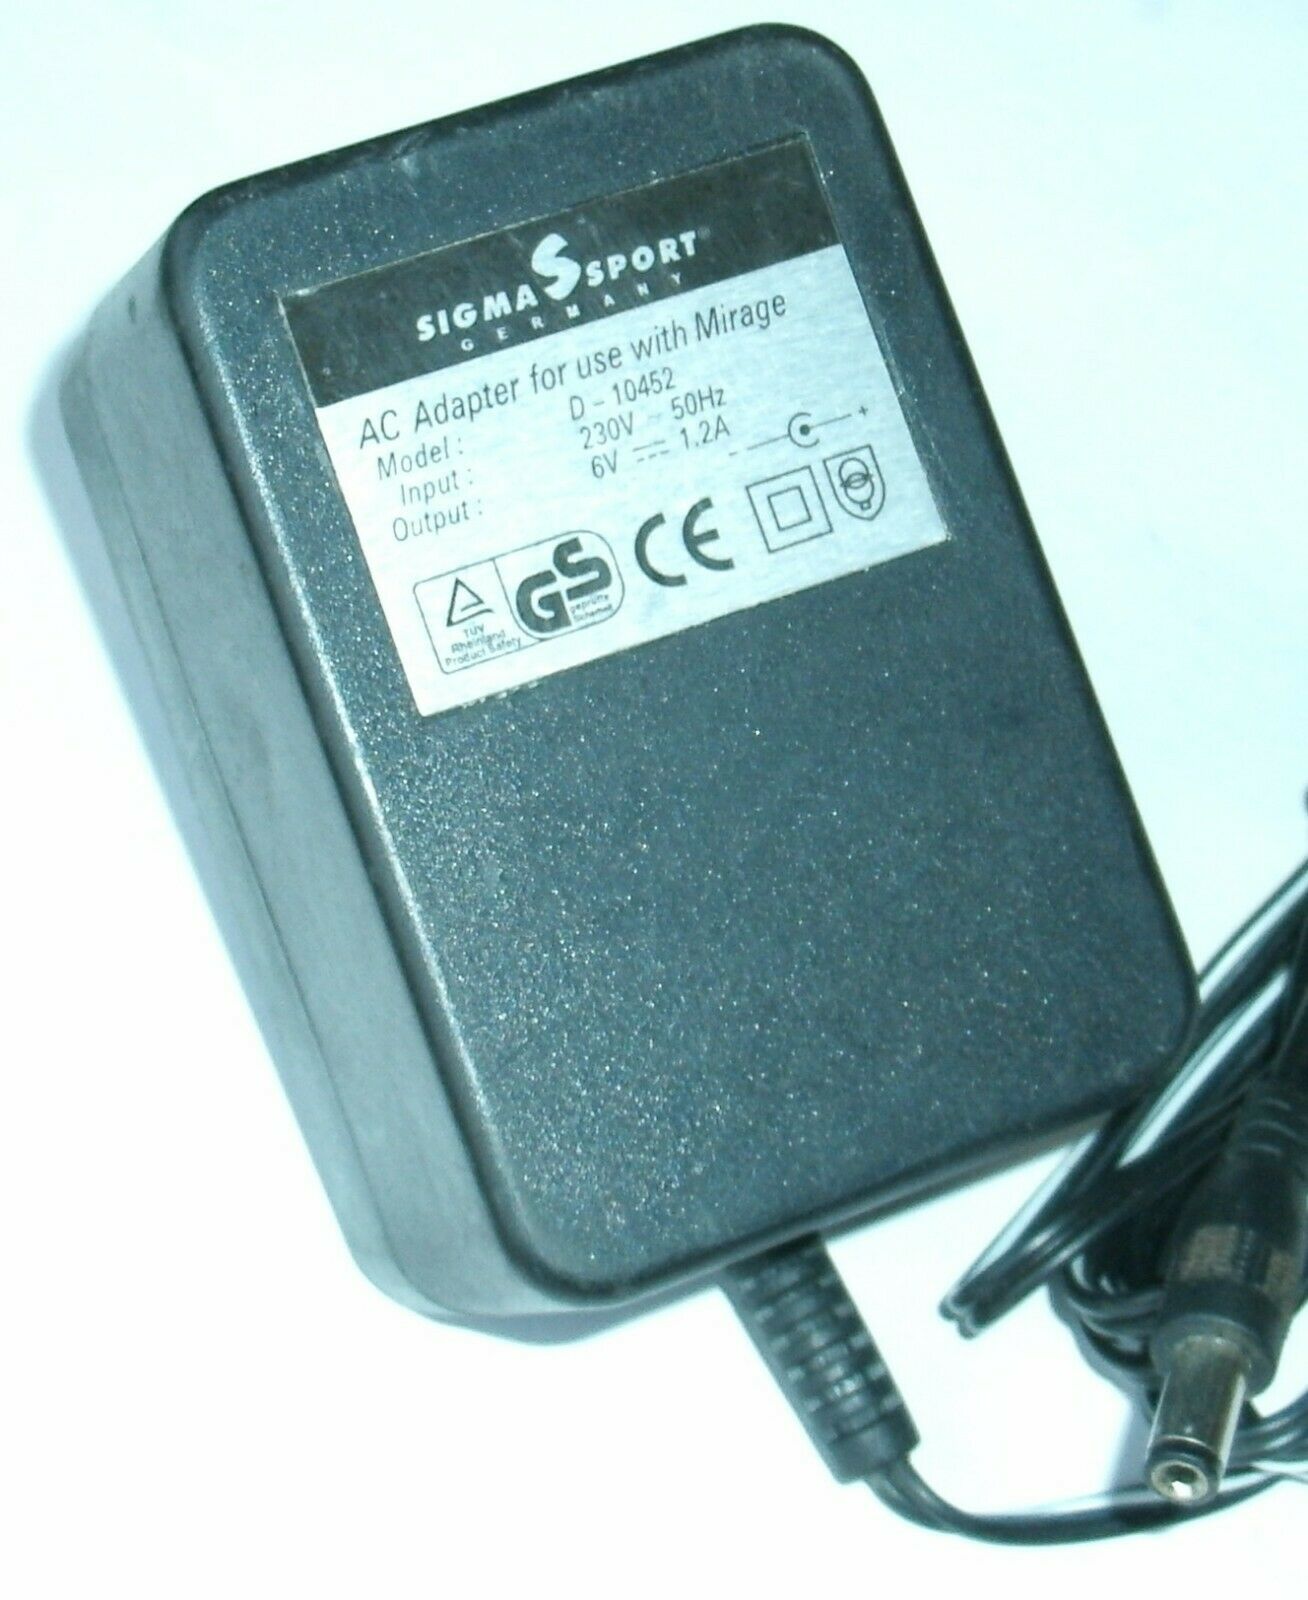 New 6V 1.2A SIGMA SPORT D-10452 Power Supply AC ADAPTER